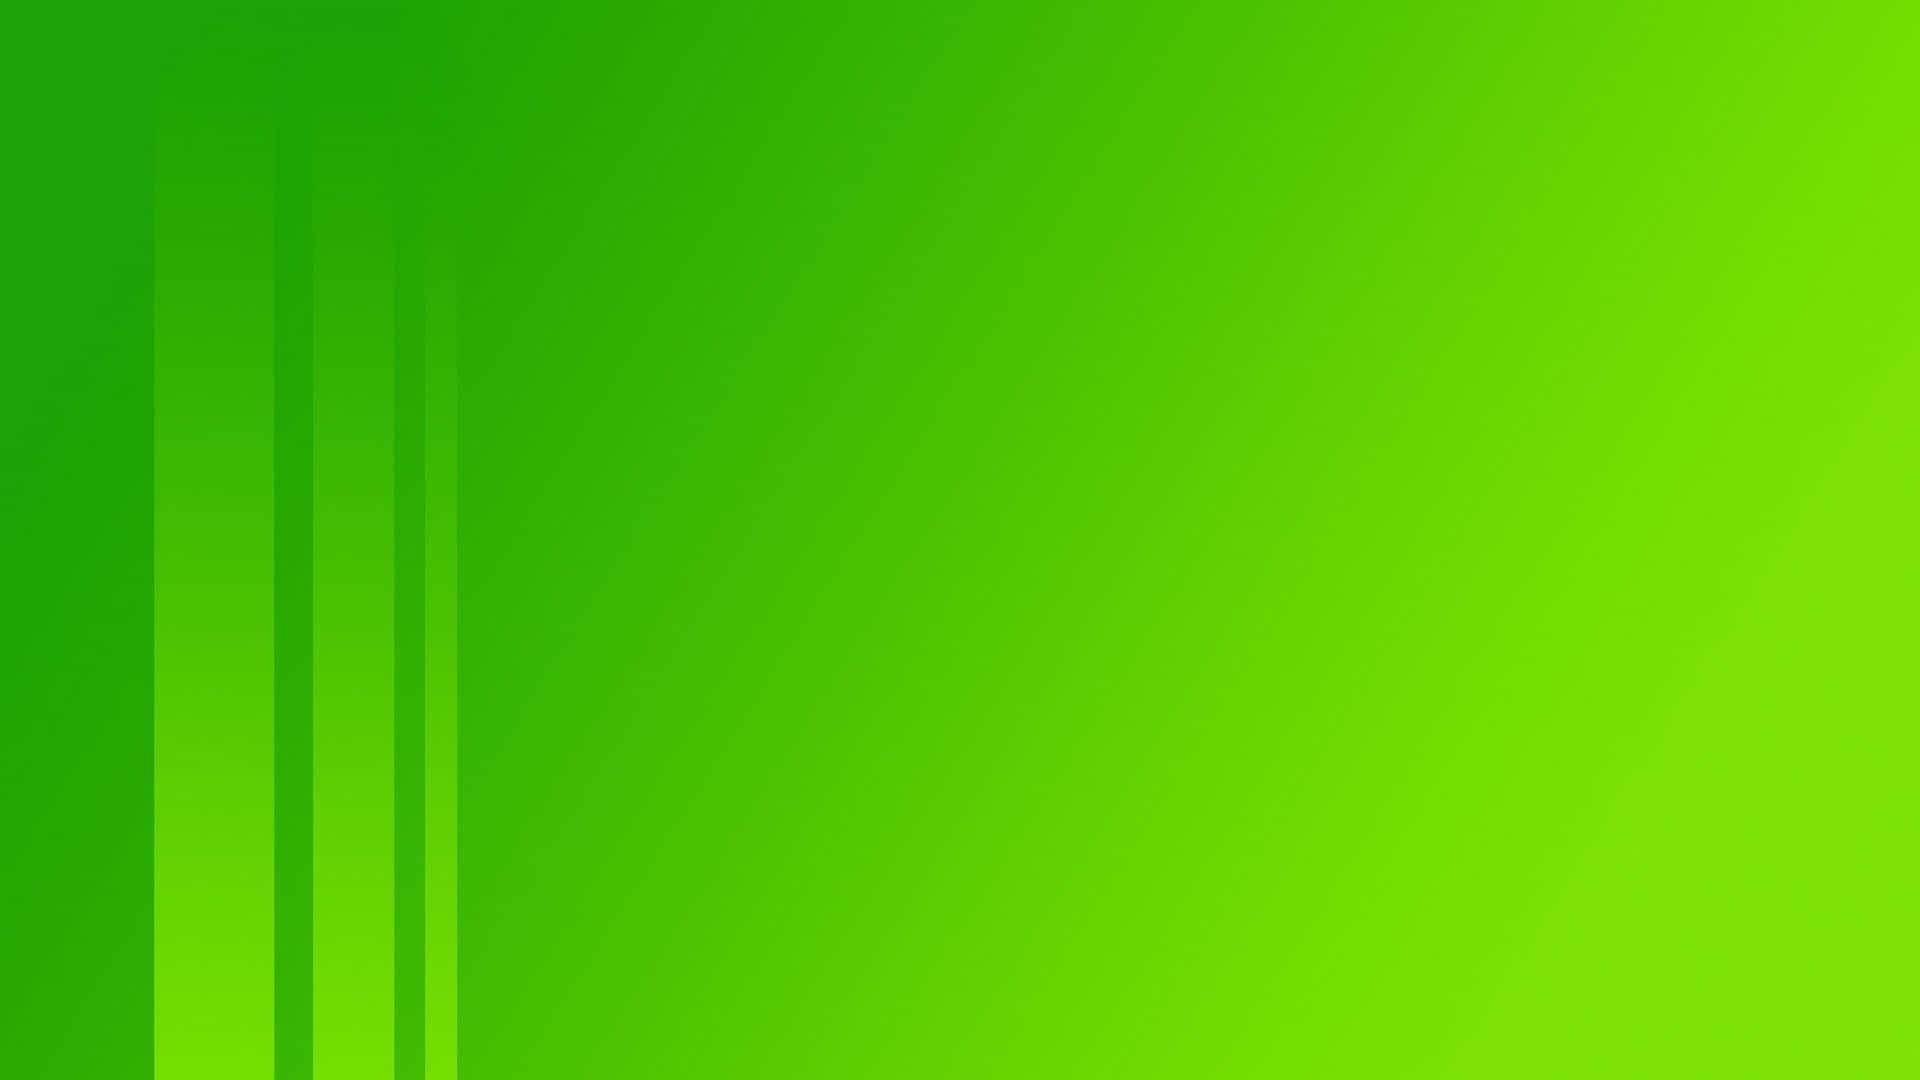 Boost Your Brand With a Solid Green Background